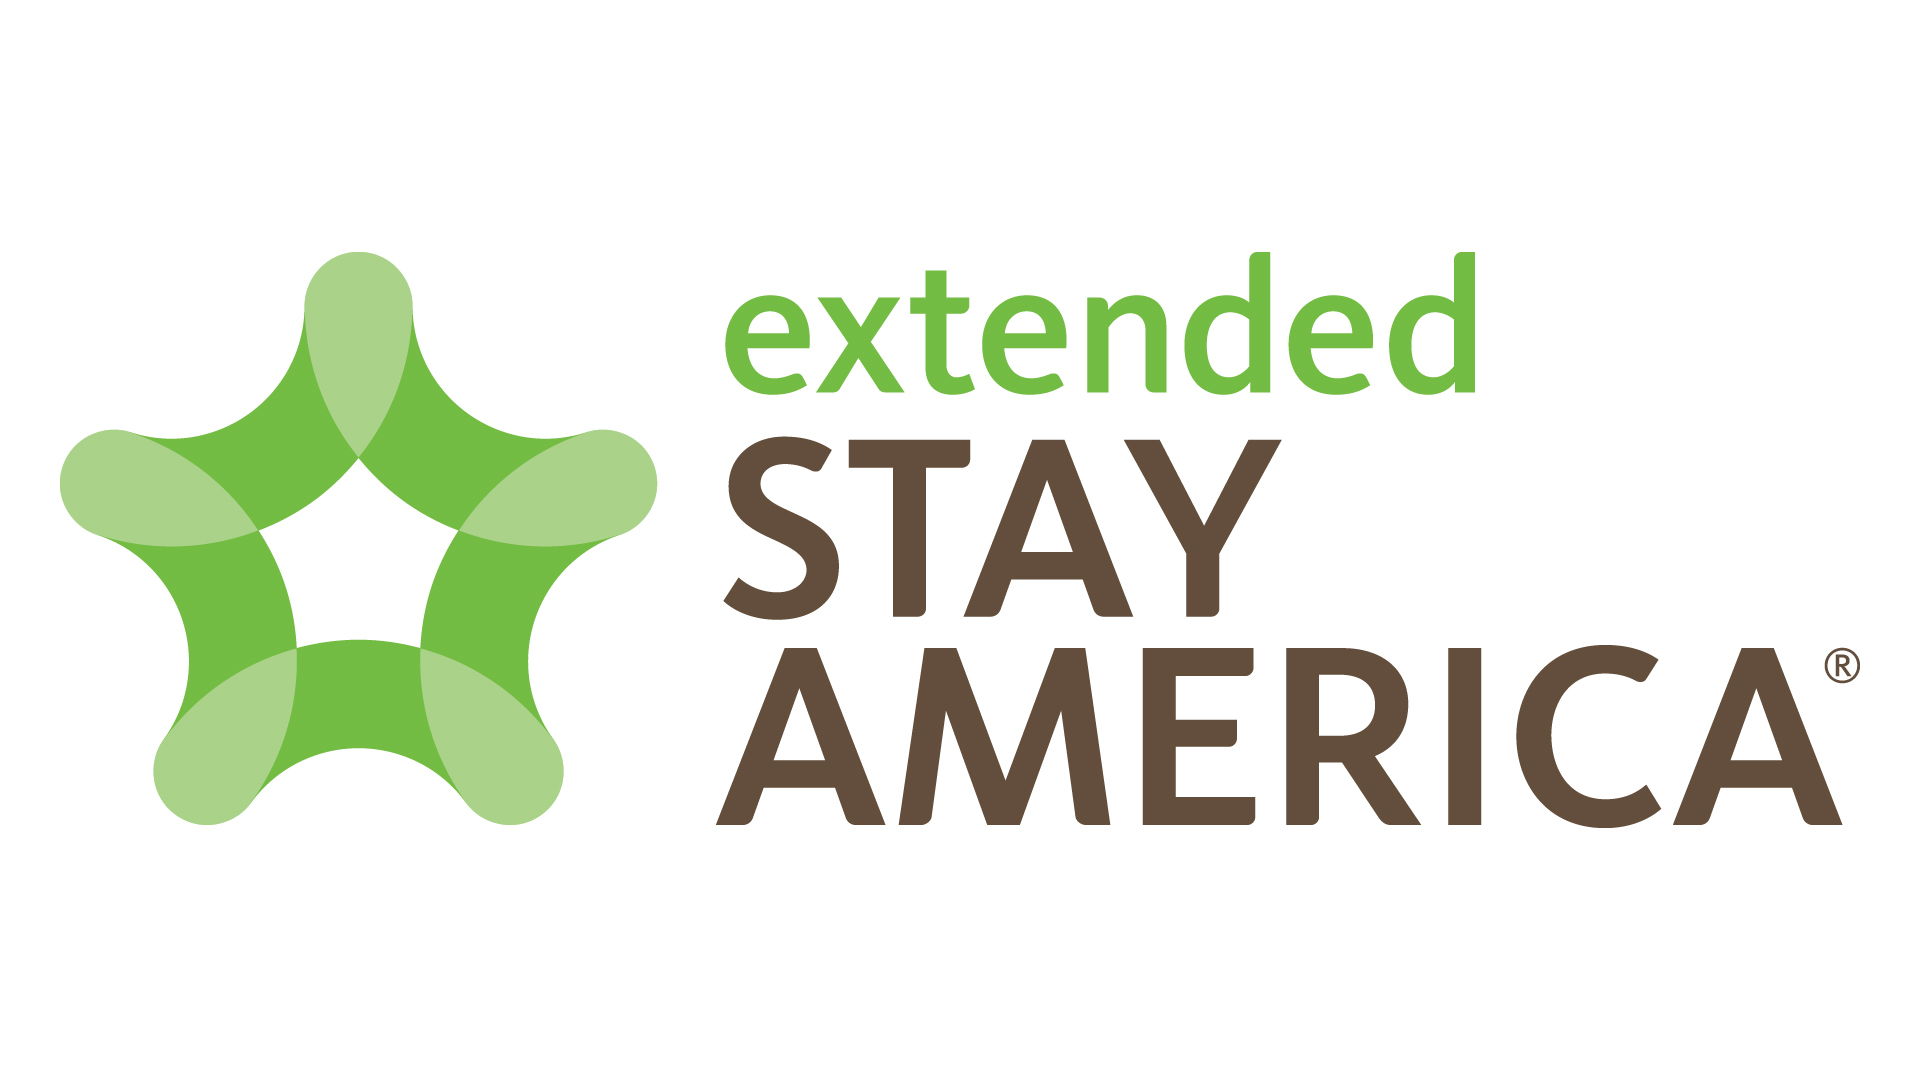 Extended Stay America® Logo